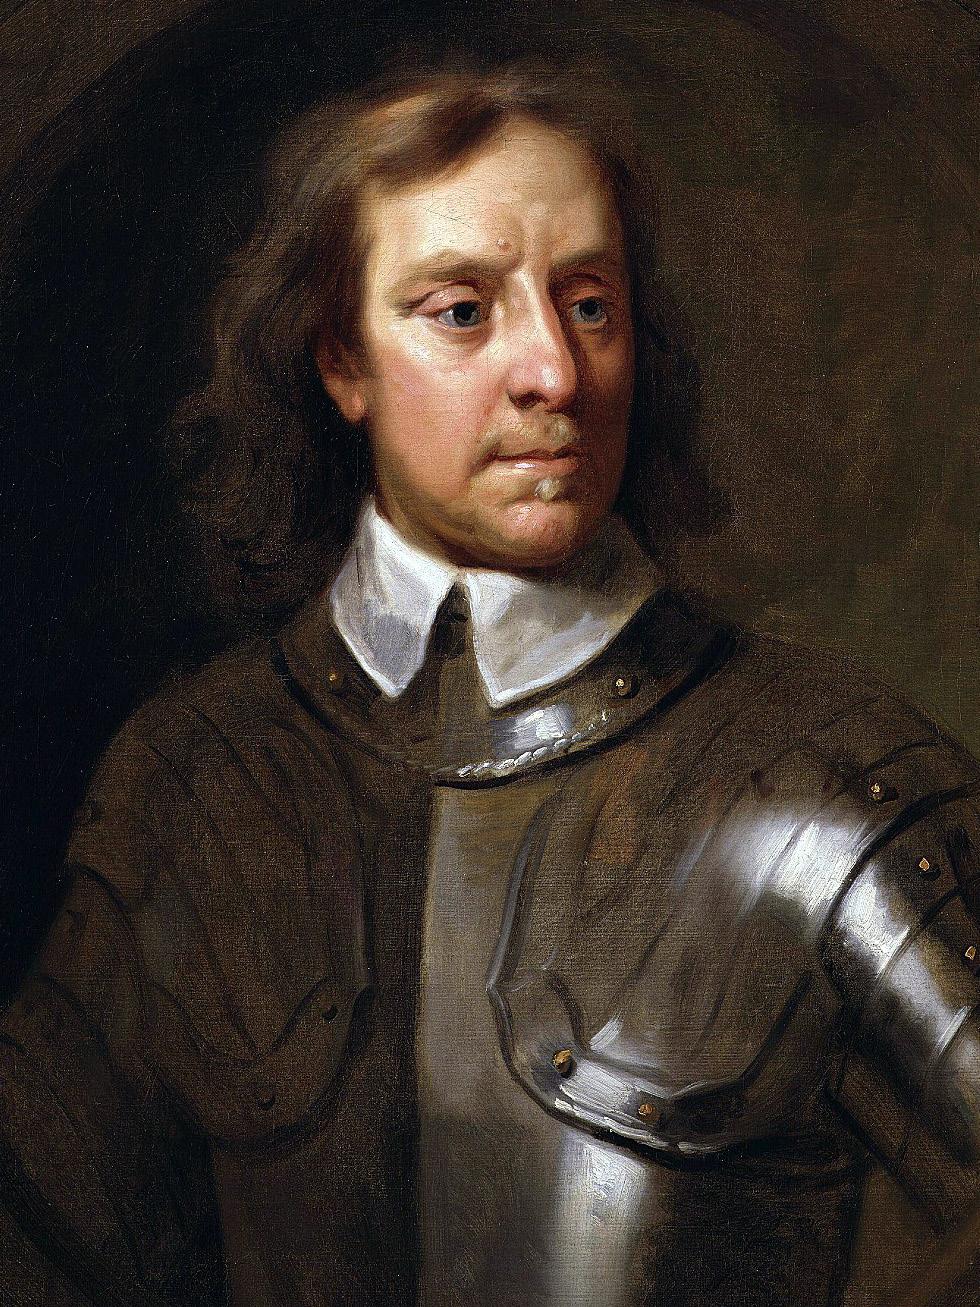 OLIVER CROMWELL (APRIL 25,